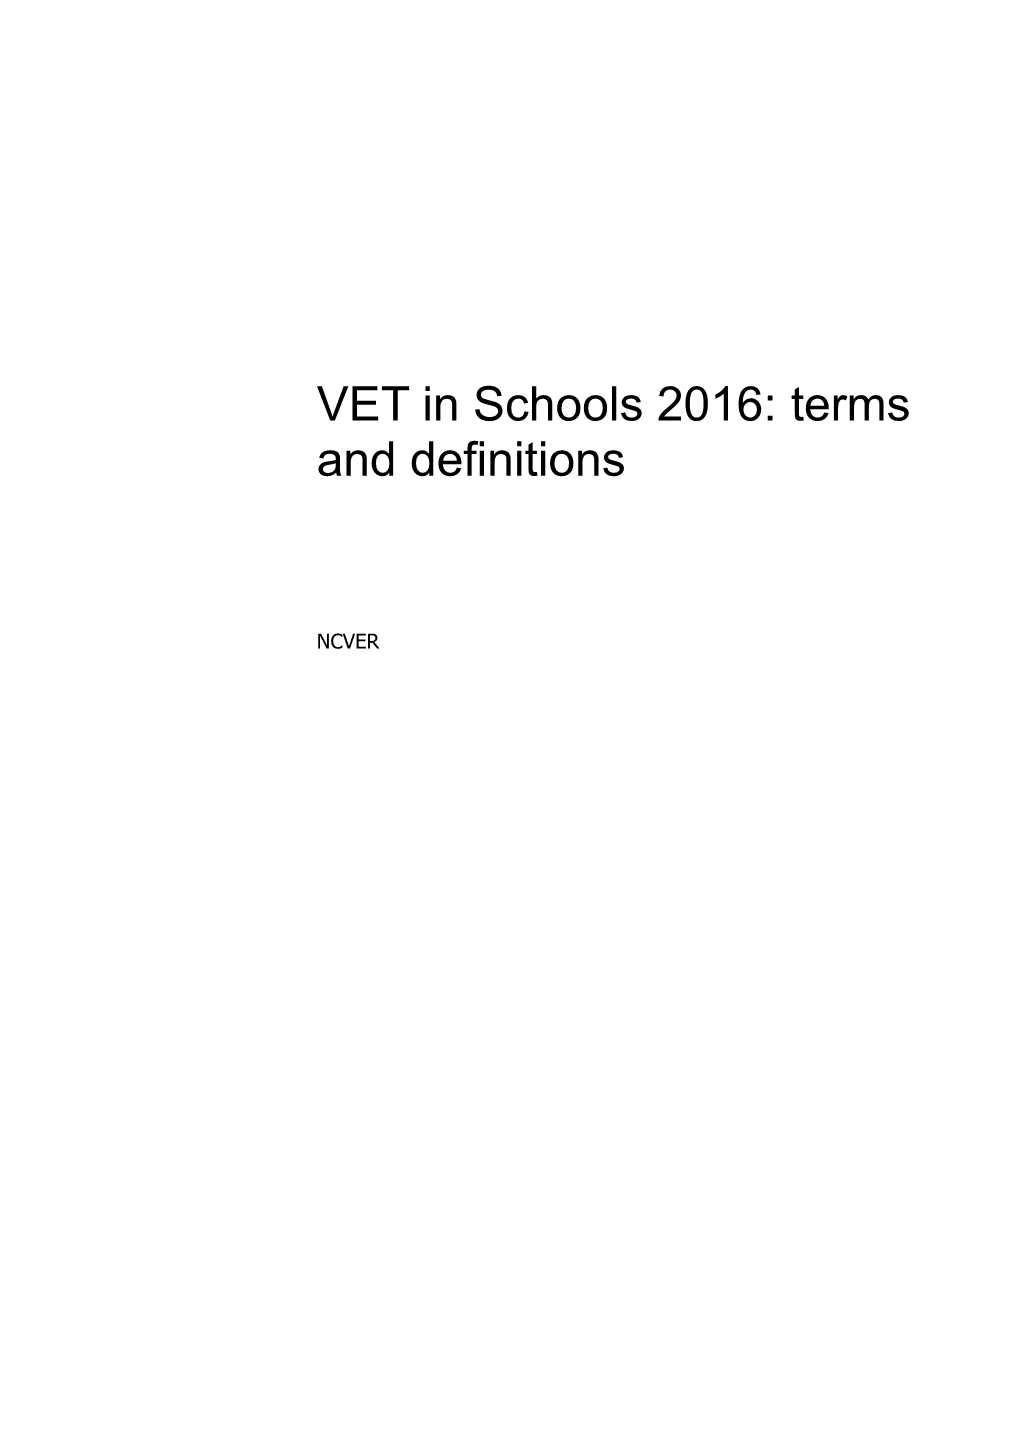 VET in Schools 2013 Terms and Definitions